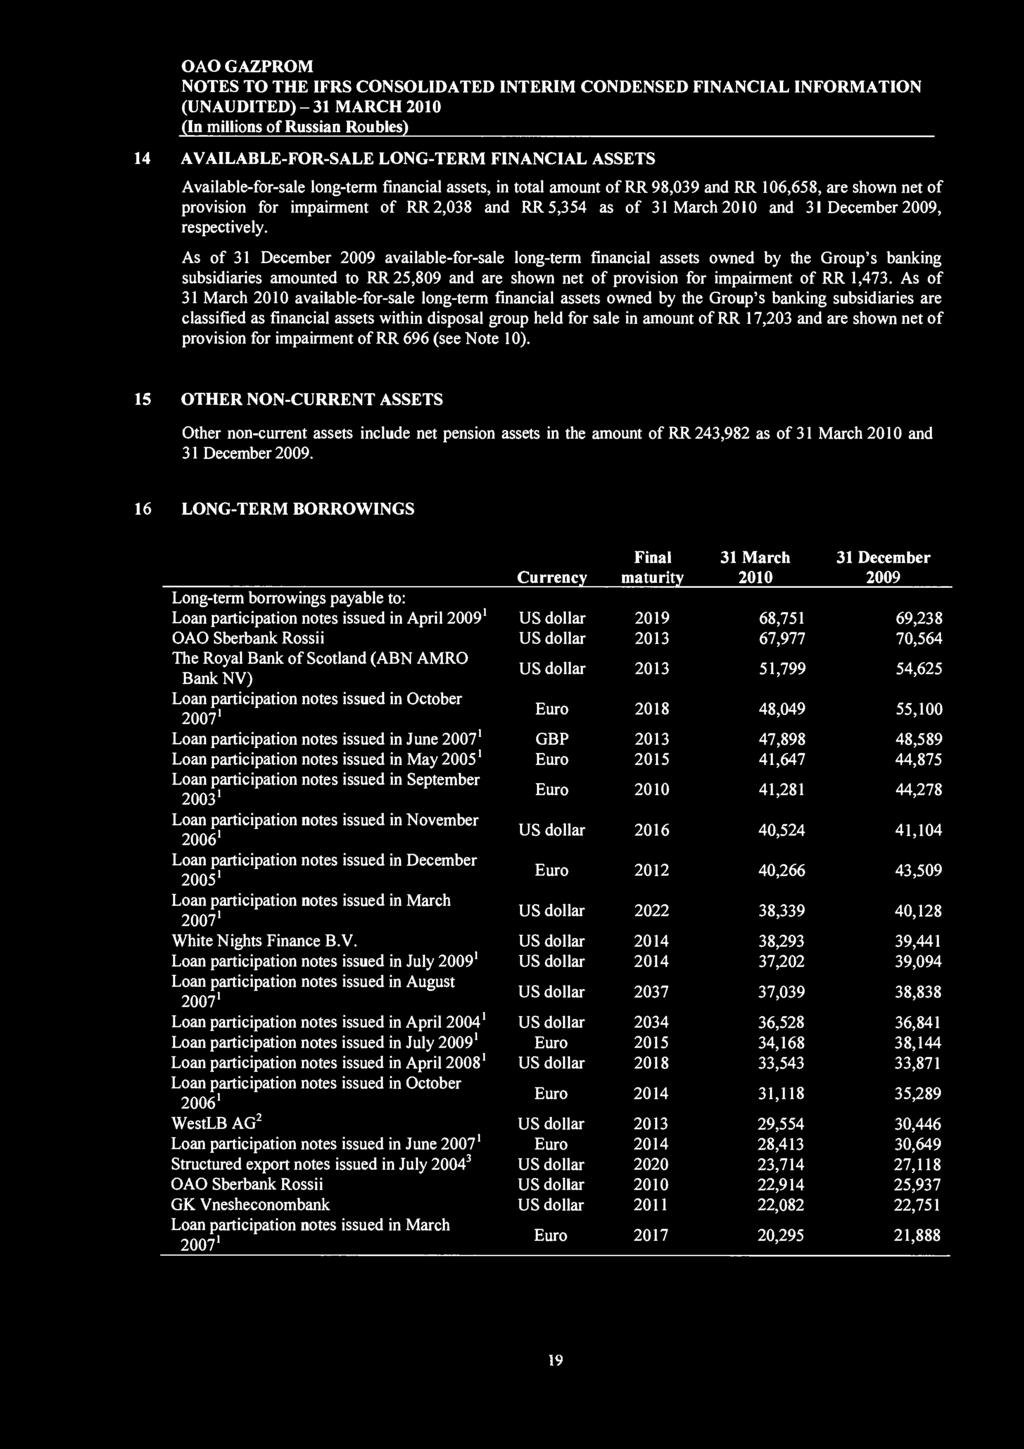 (UNAUDITED)-31 MARCH 2010 14 AVAILABLE-FOR-SALE LONG-TERM FINANCIAL ASSETS Available-for-sale long-term financial assets, in total amount of RR 98,039 and RR 106,658, are shown net of provision for